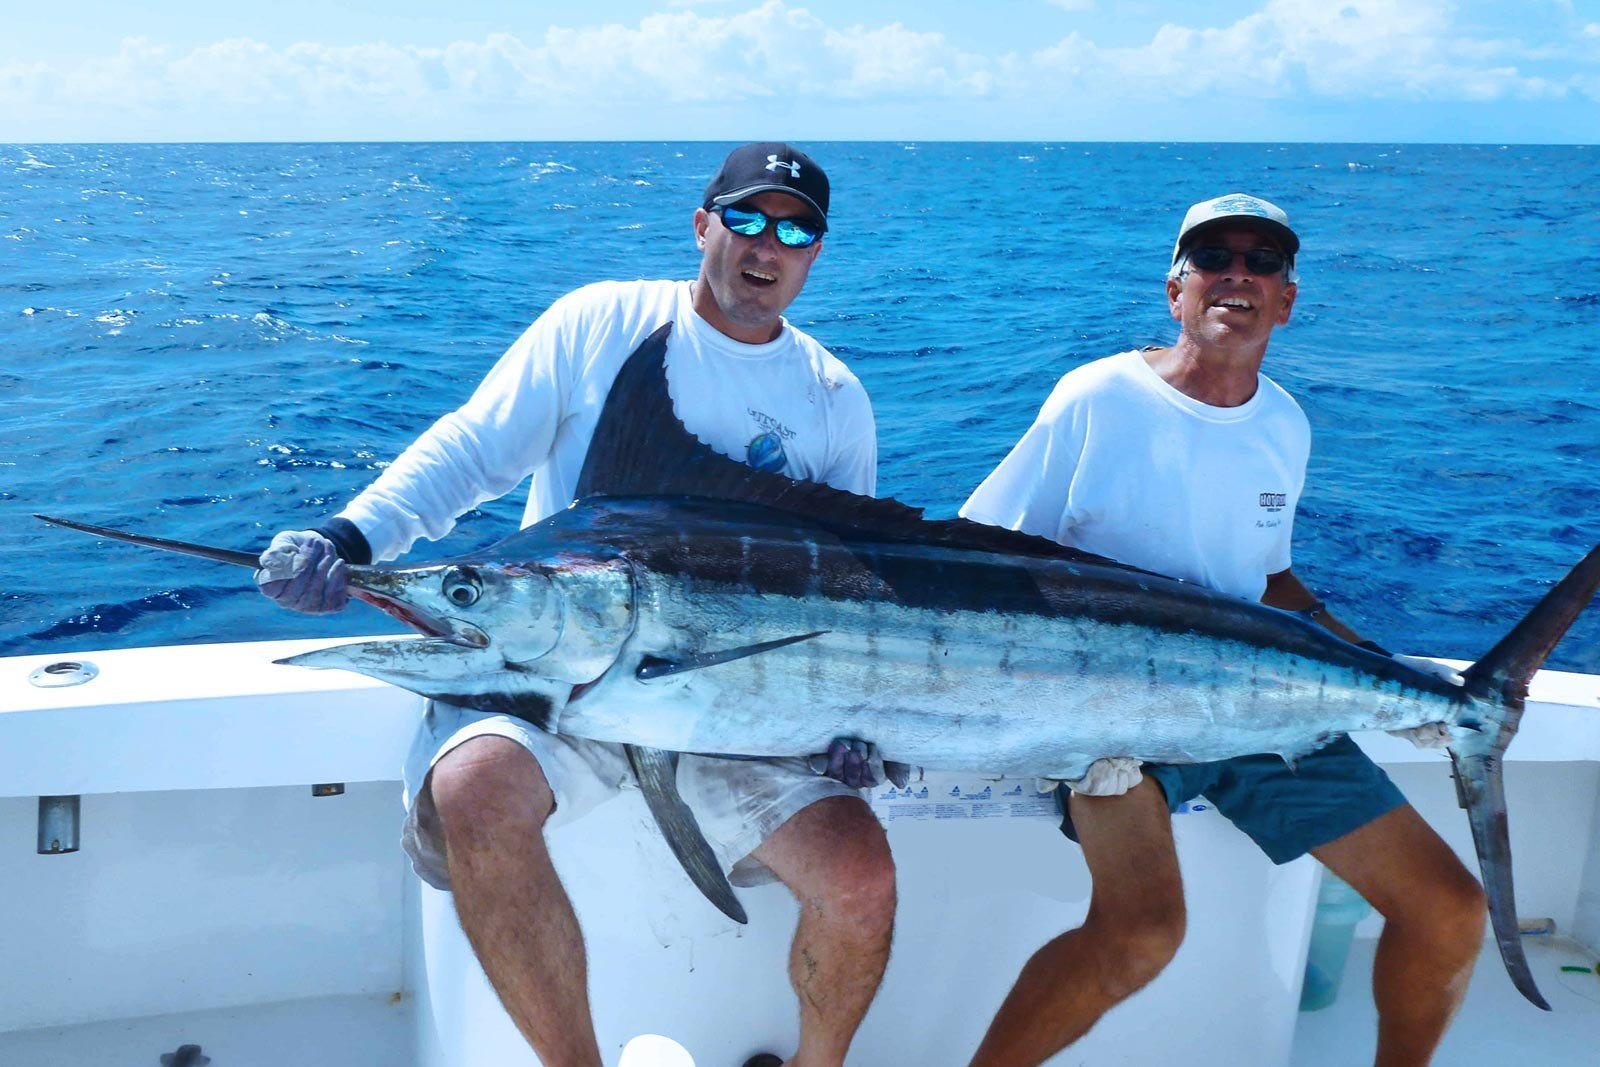 You could get lucky and catch a famous Sailfish!